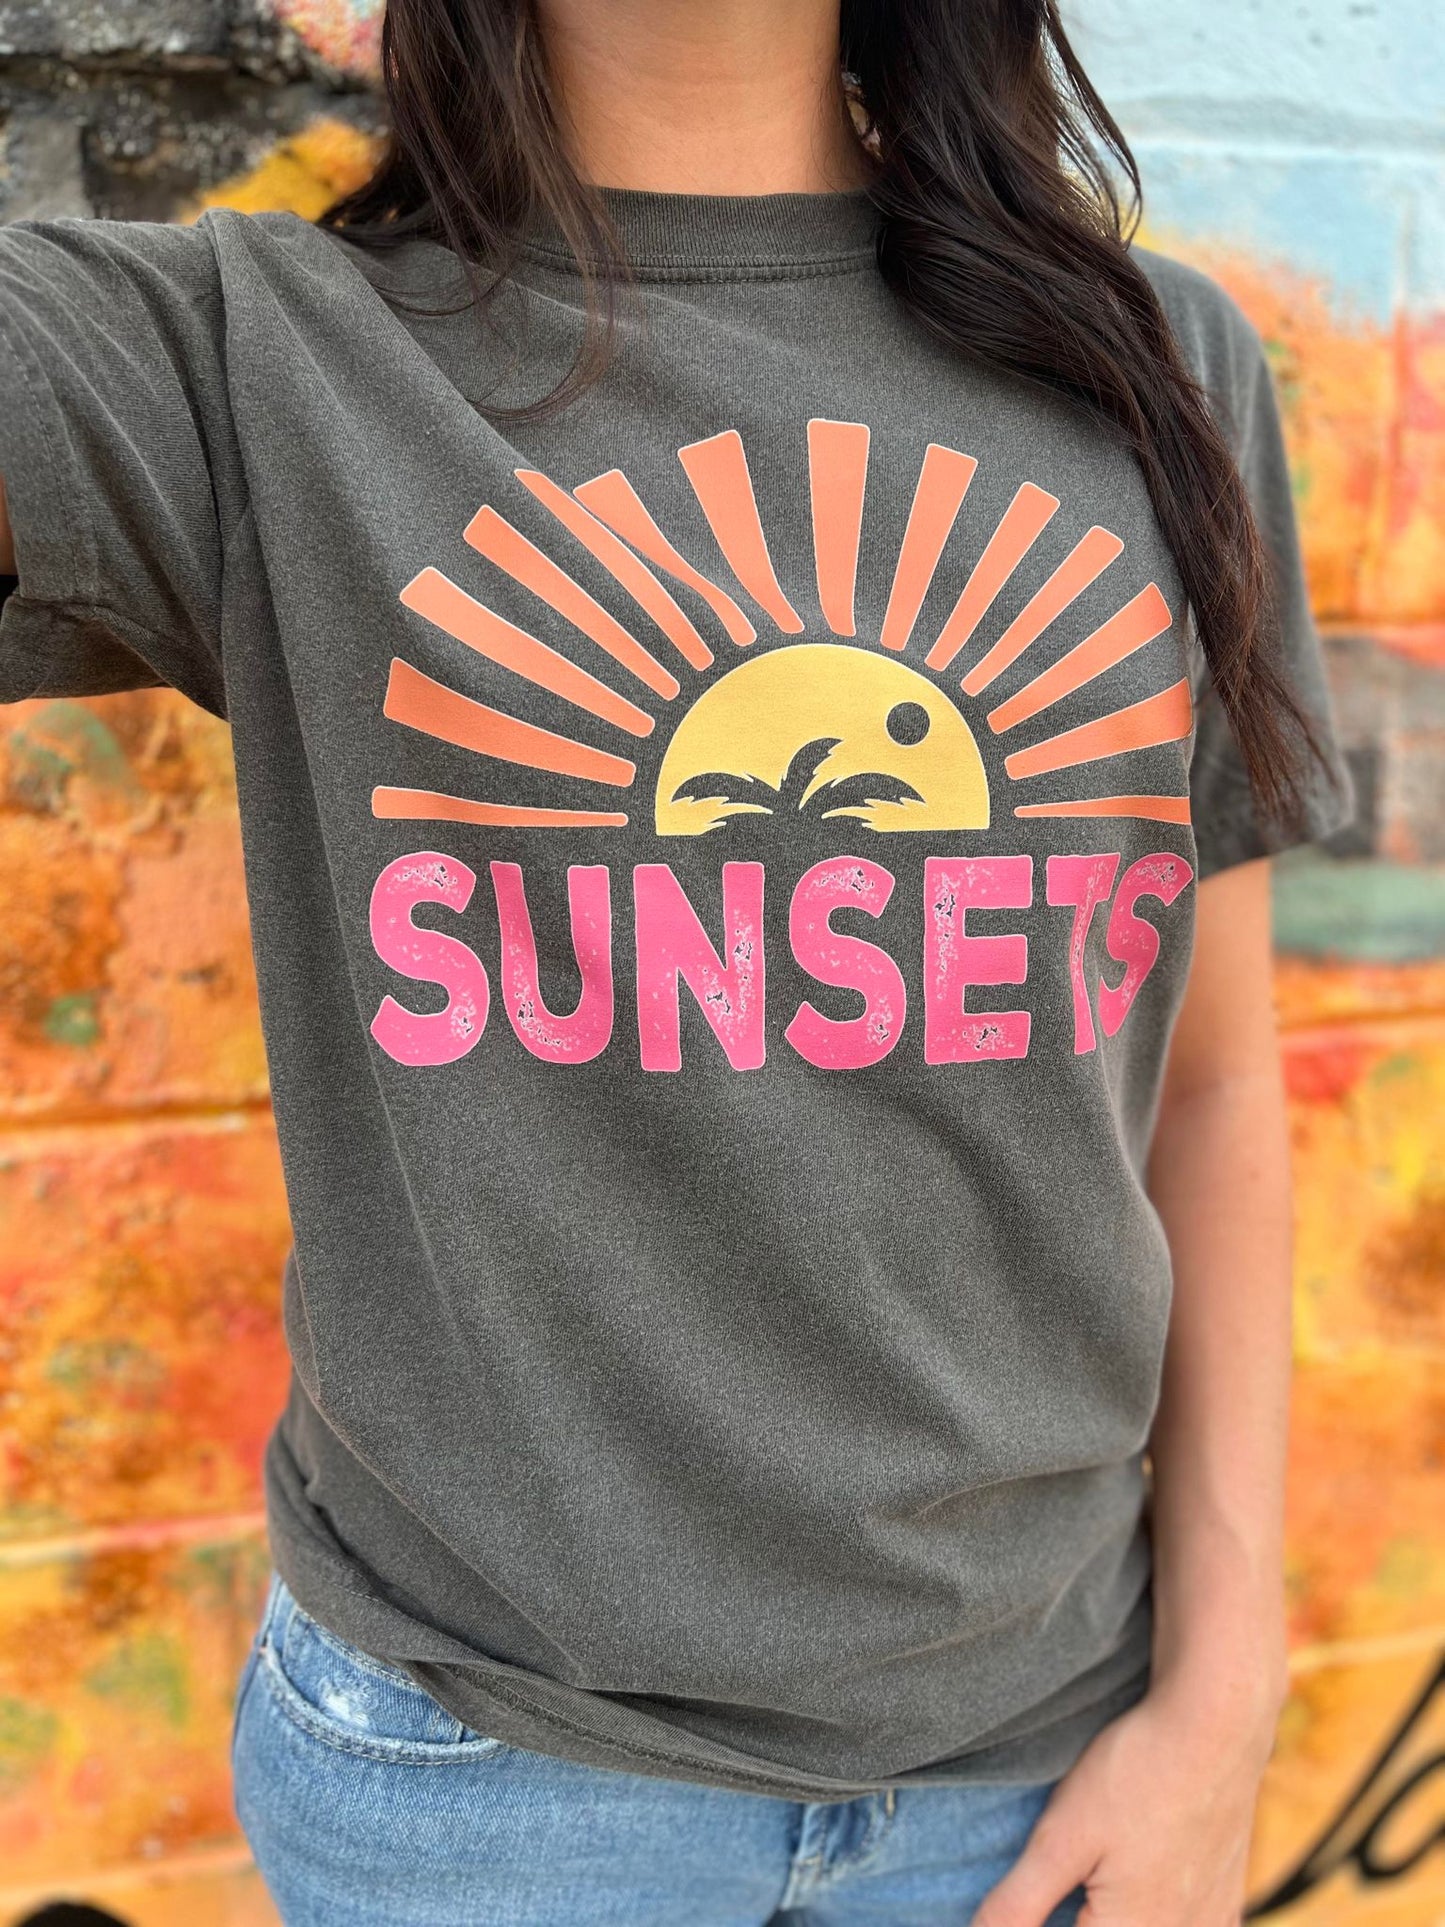 Forever Chasing Sunsets Tee- ASK Apparel LLC